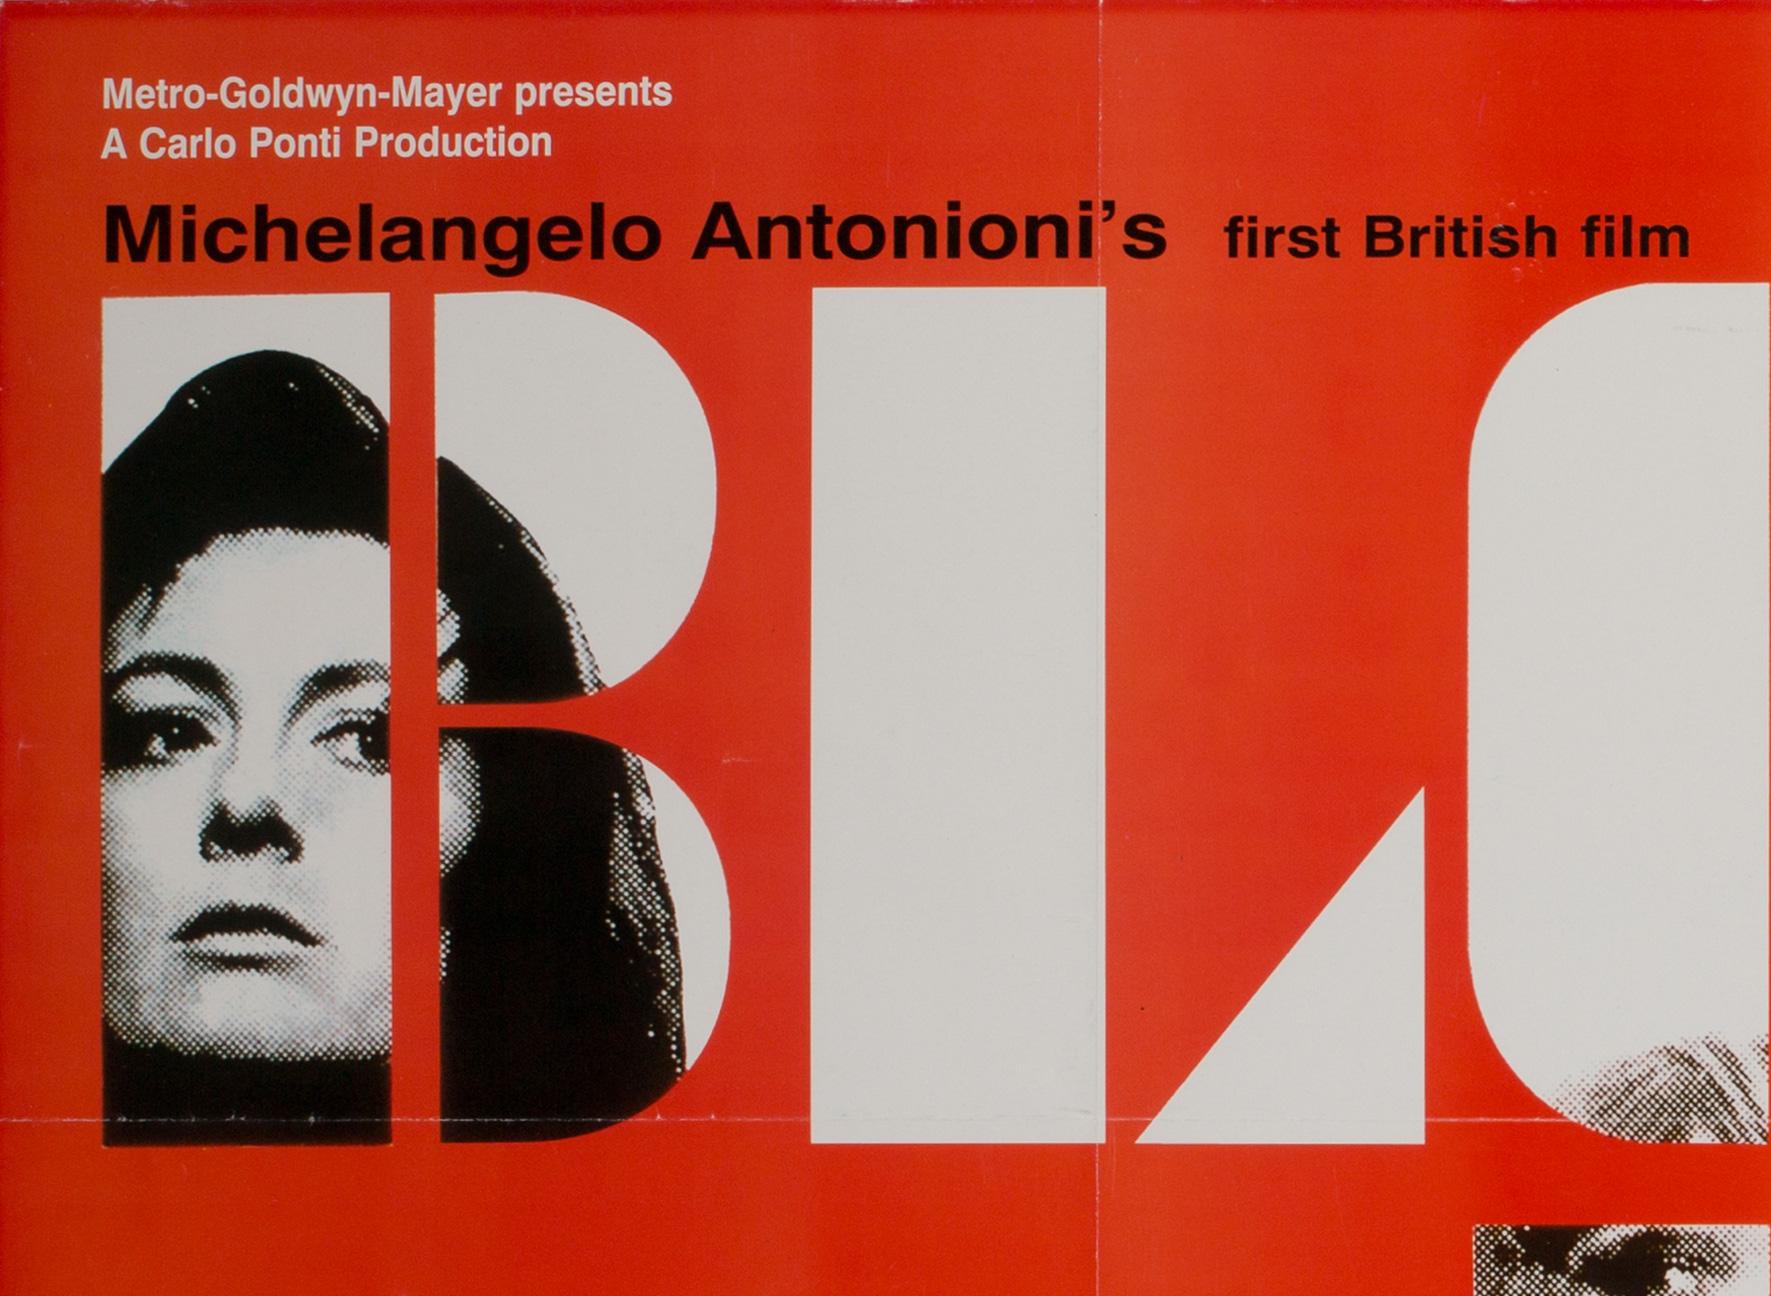 This fabulous country-of-origin poster for Michelangelo Antonioni's 1960s cult Classic Blow-up. starring Vanessa Redgrave and David Hemmings was a special doubled-sided promo poster likely sent to cinemas to get them to book the film.

Actual film